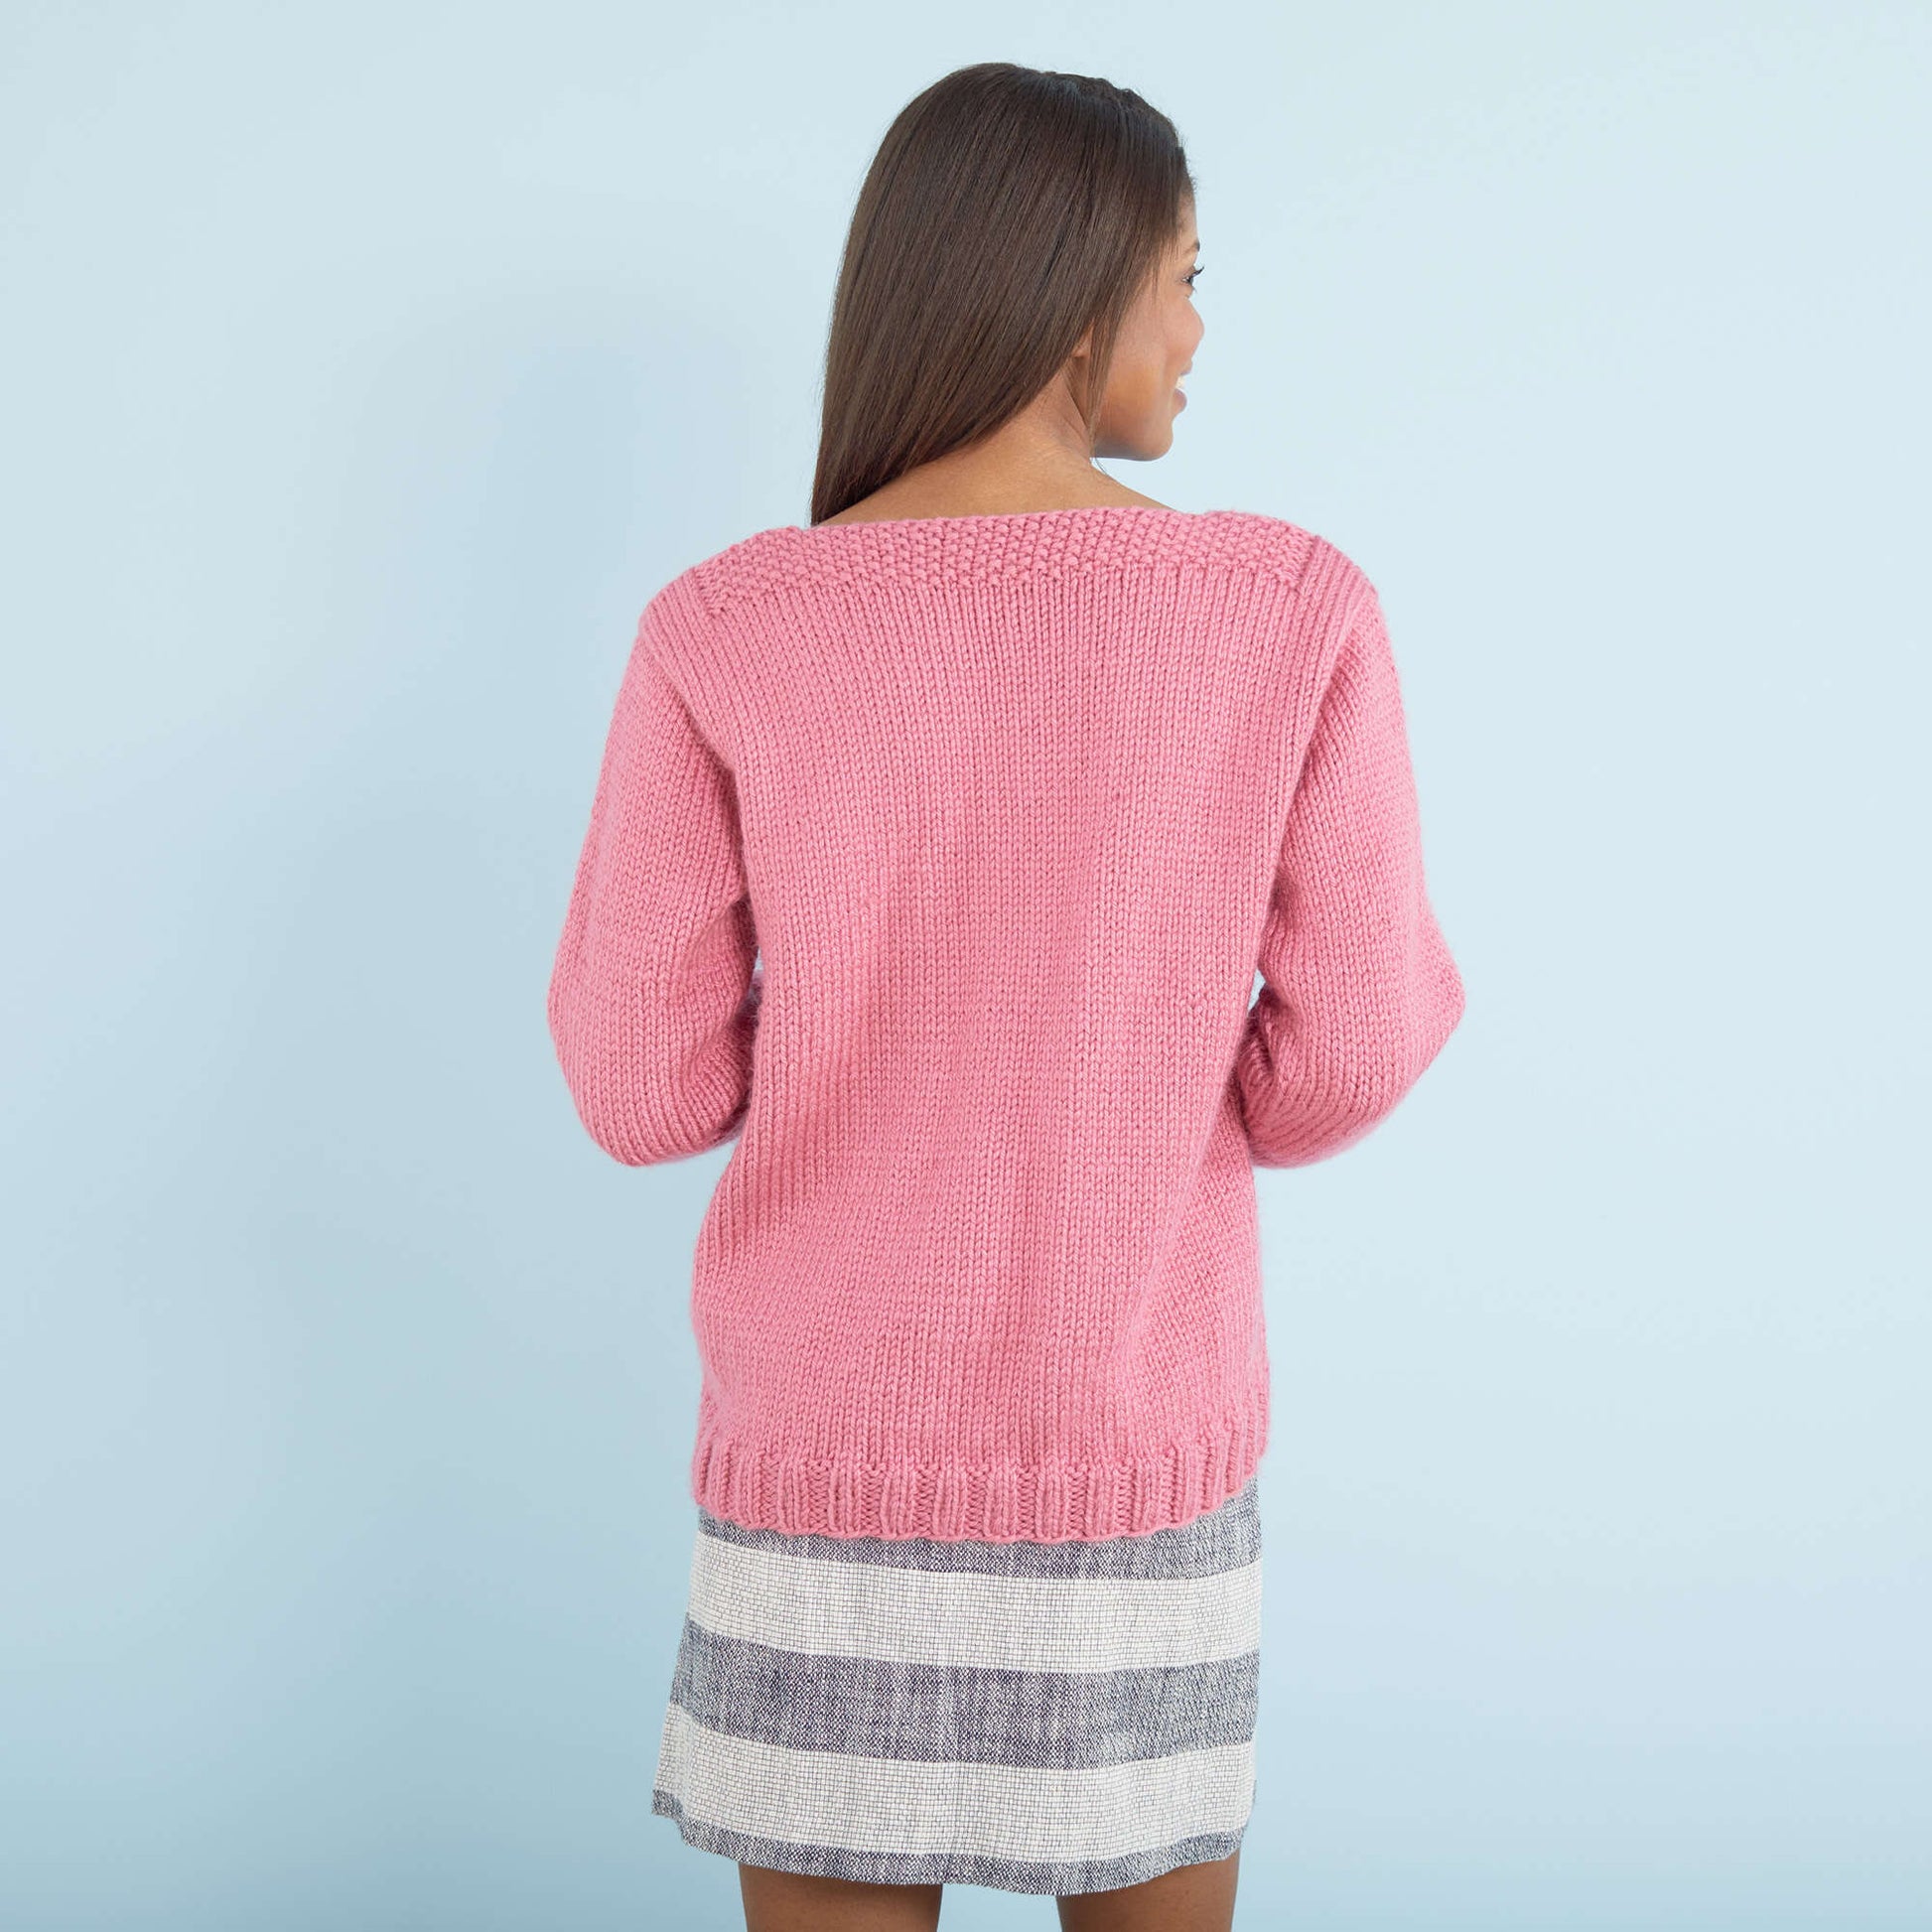 Free Red Heart Lovely Cable Knit Sweater Pattern